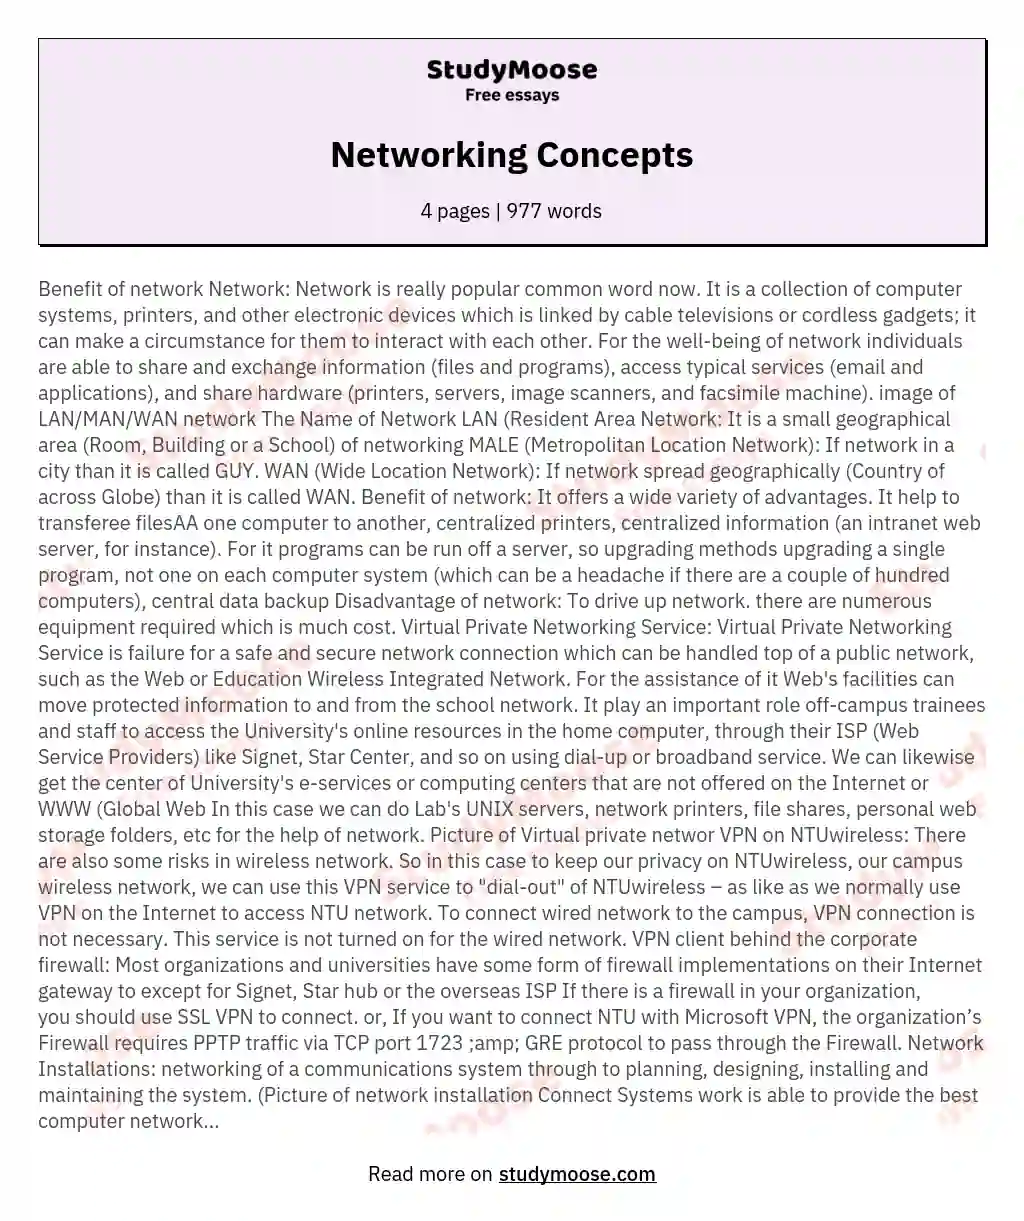 Networking Concepts essay